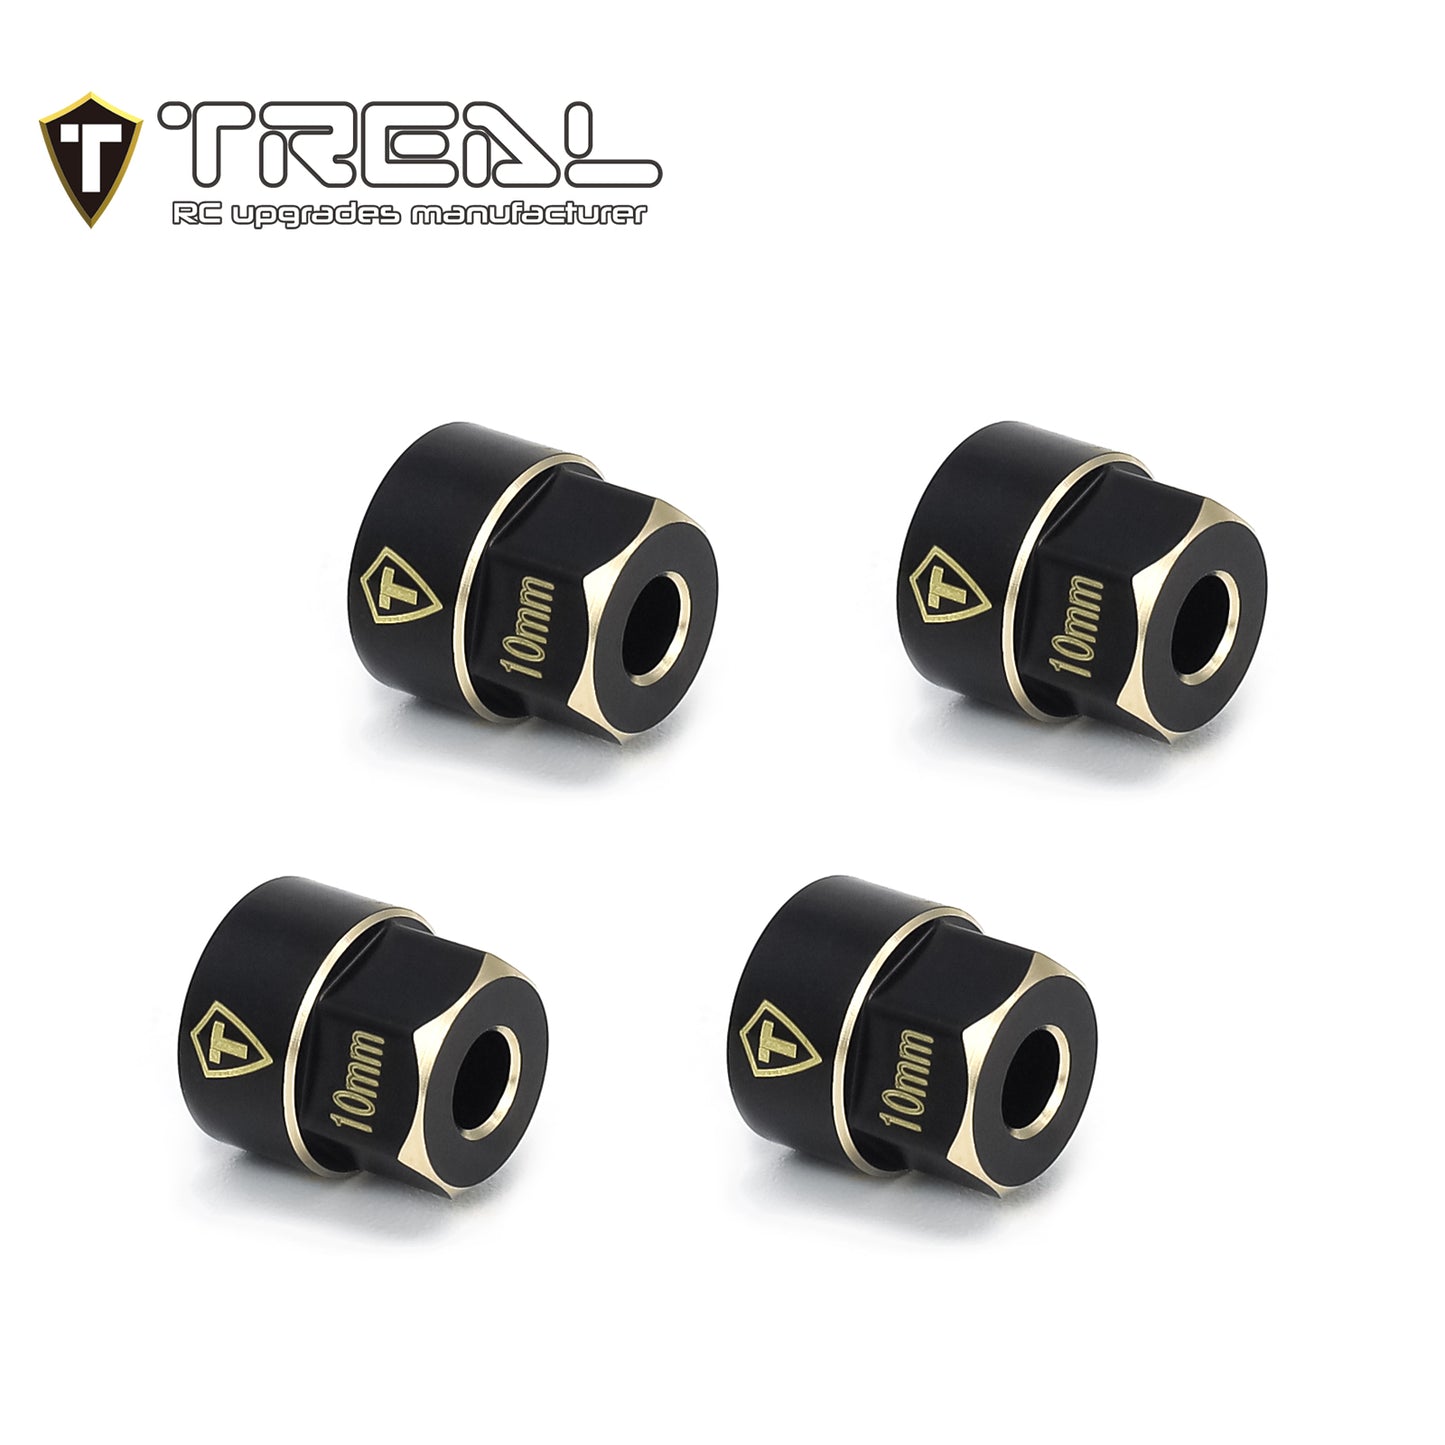 TREAL Brass Extended Wheel Hubs 7mm*10mm Hex, 3g/pc (4pcs) for 1/18 TRX4M Defender and Bronco (Black)